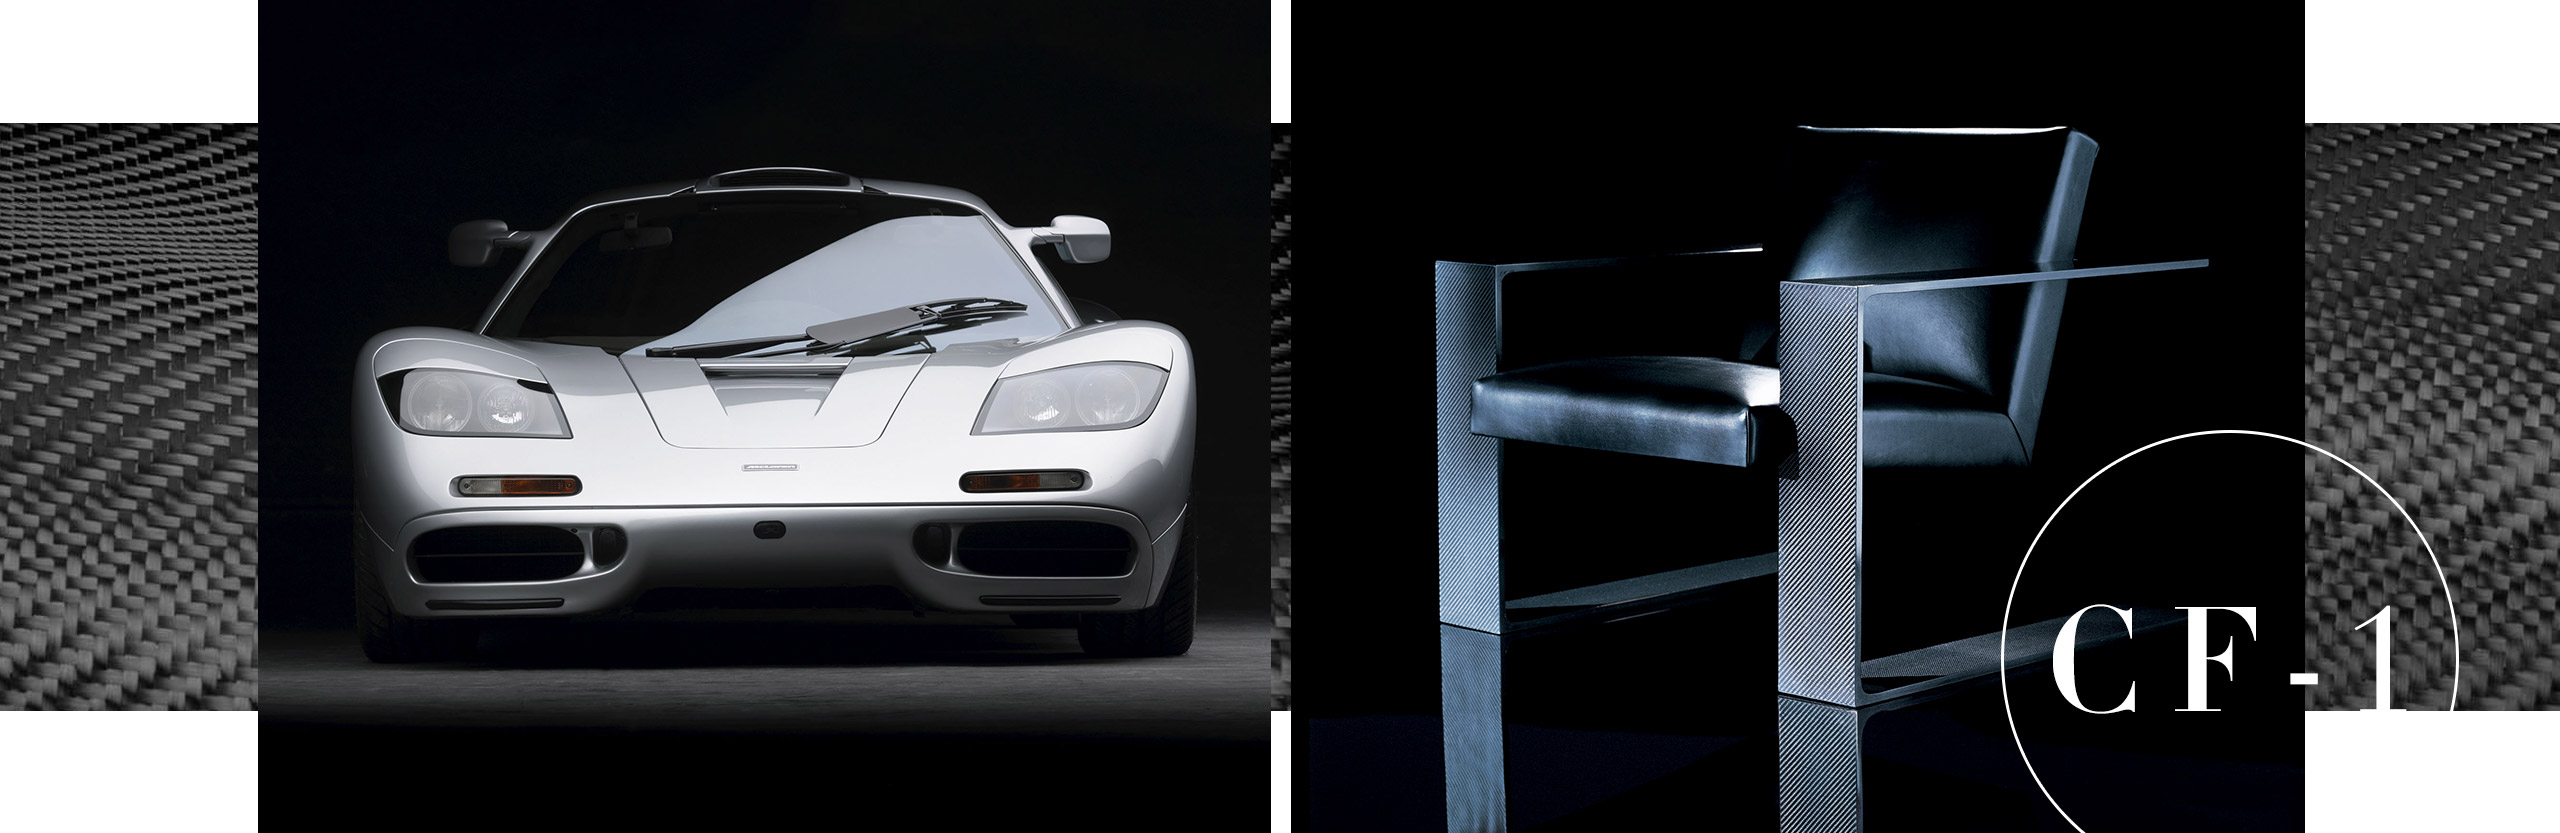 The McLaren F1, and the CF-1 chair from Ralph Lauren Home, inspired by the car’s innovative use of carbon fiber